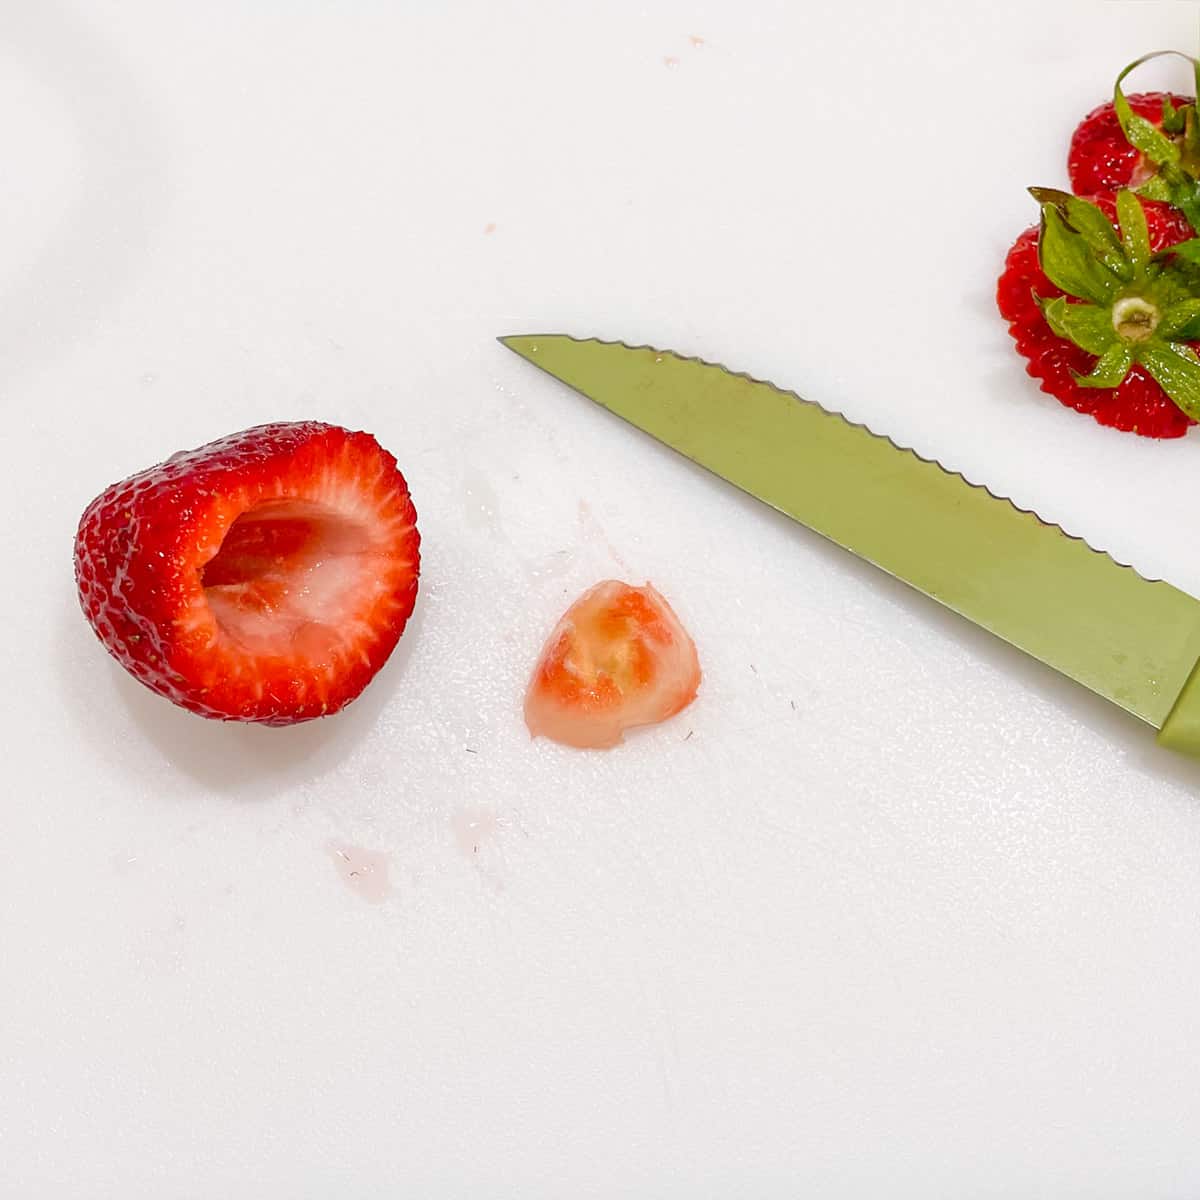 A hulled strawberry which is the center cut out.